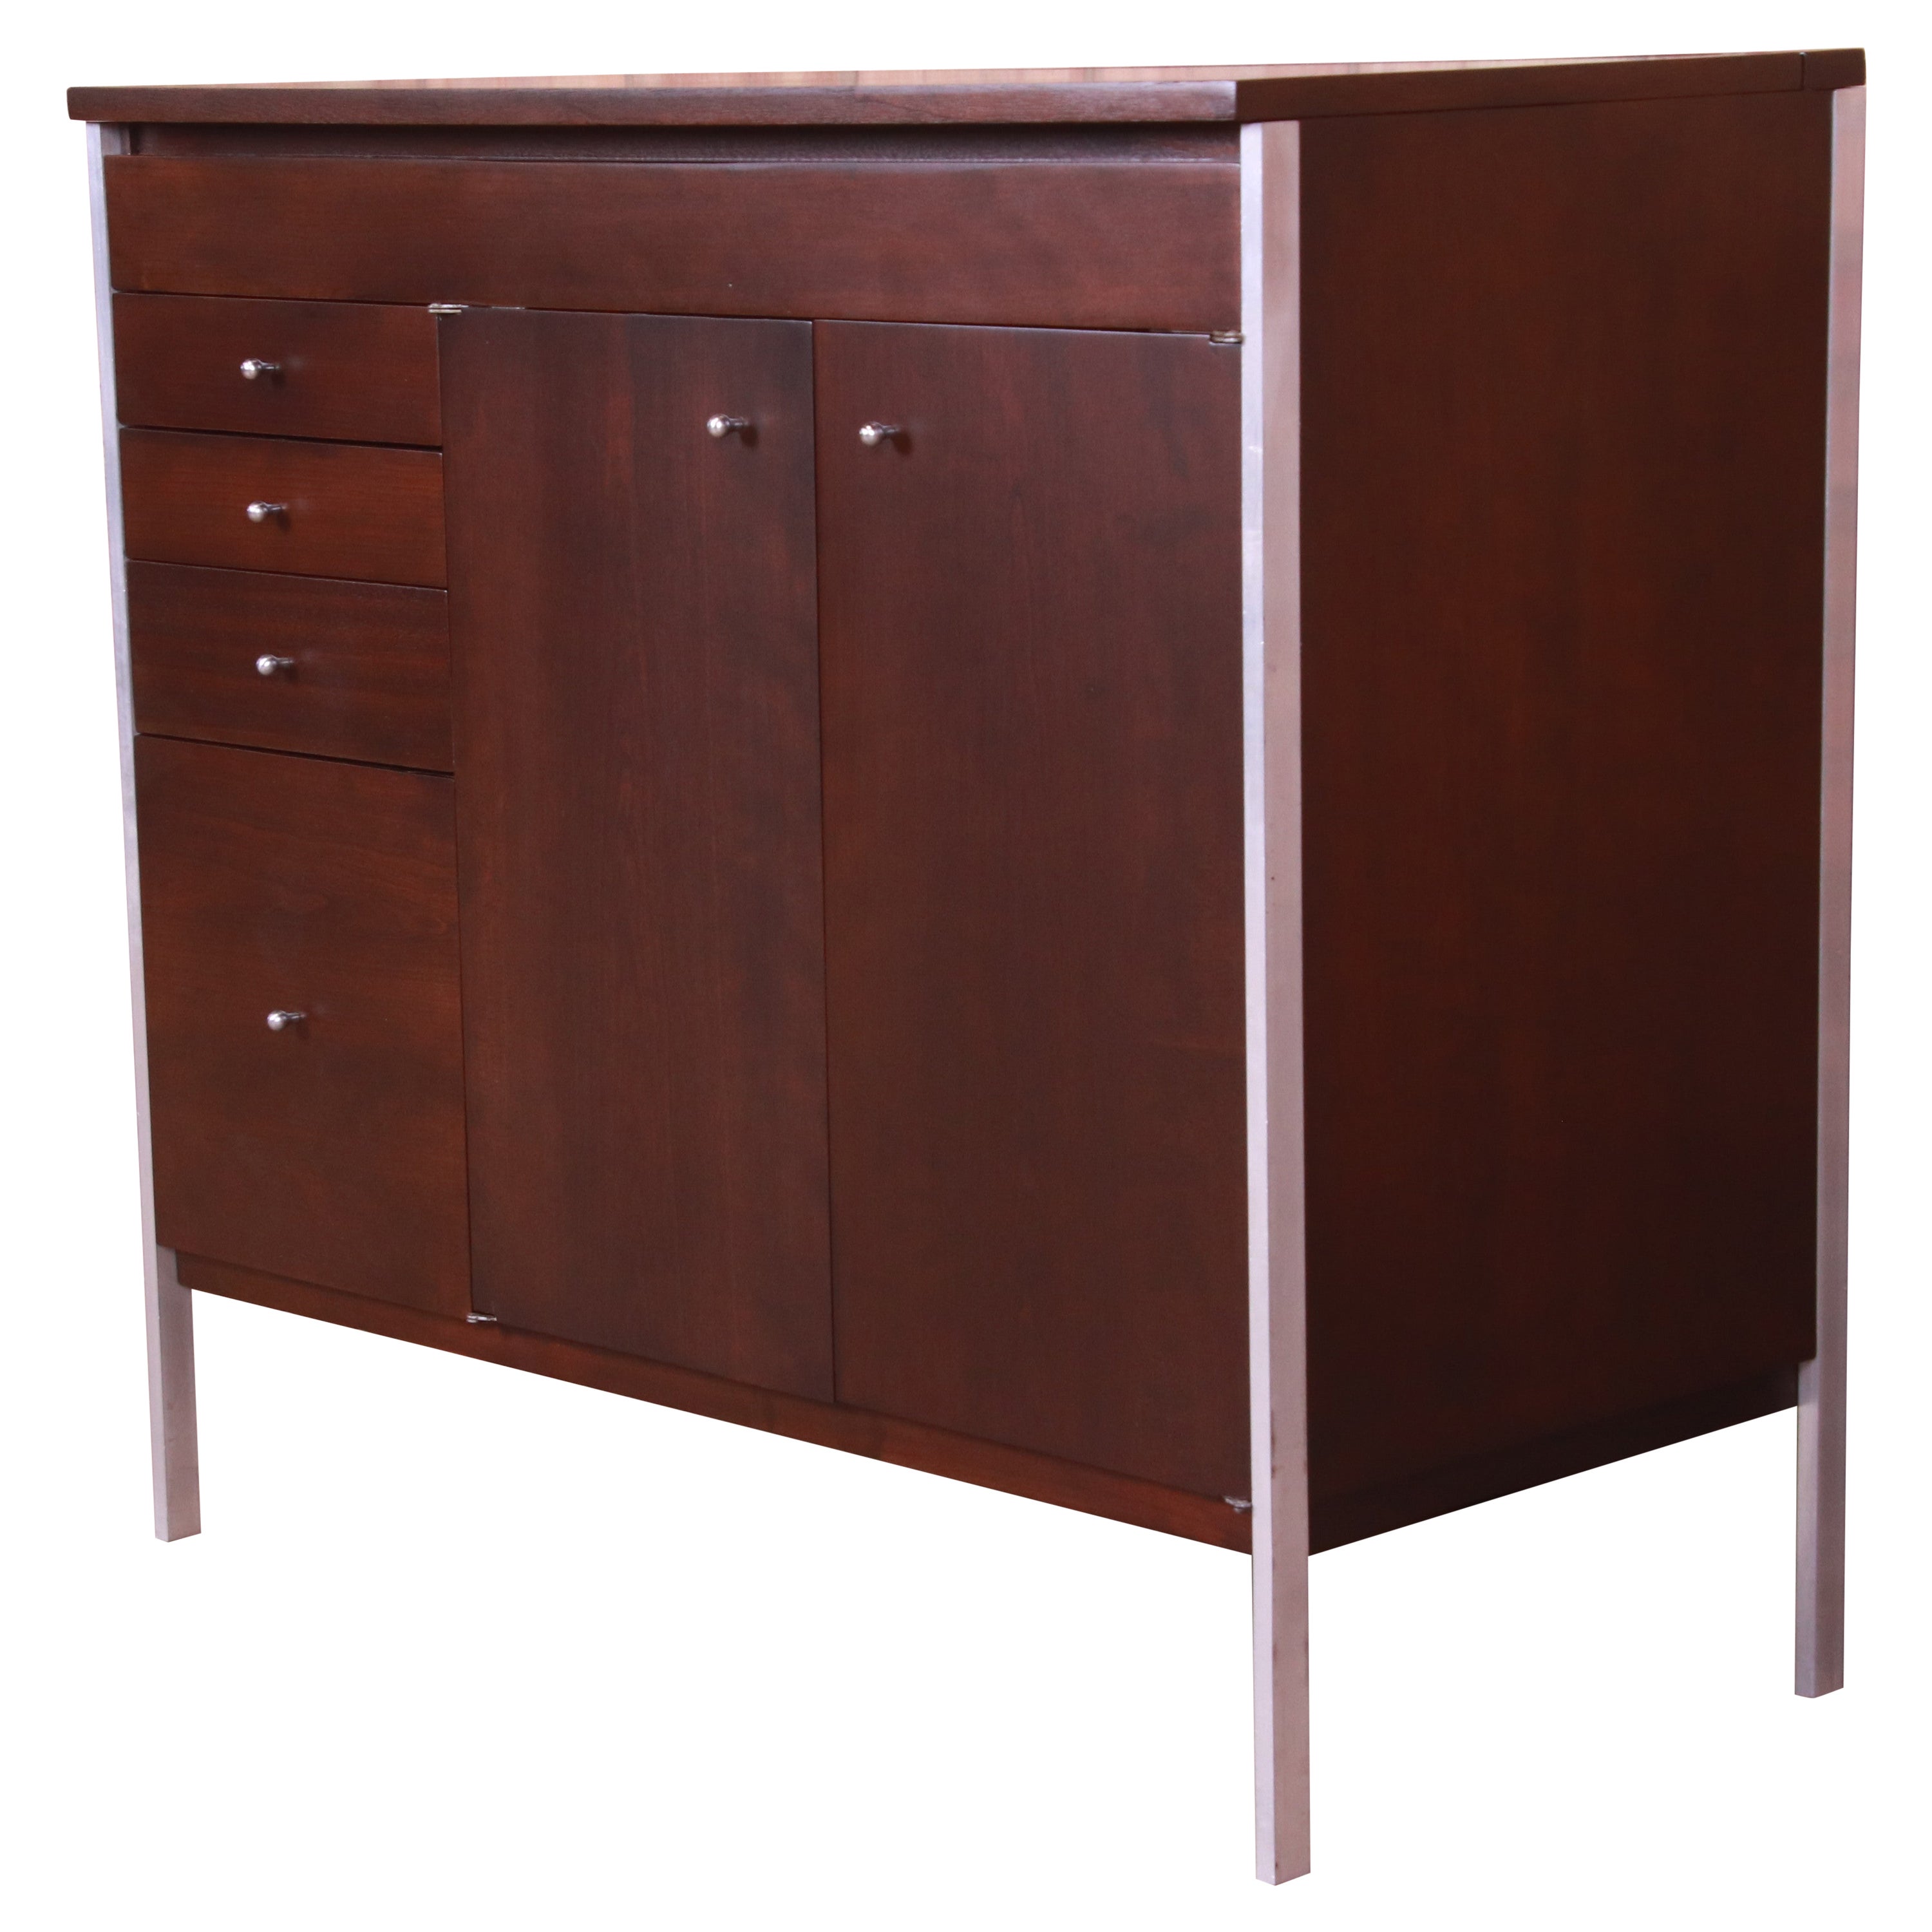 Paul McCobb Connoisseur Collection Mahogany Lift Top Bar Cabinet, Refinished